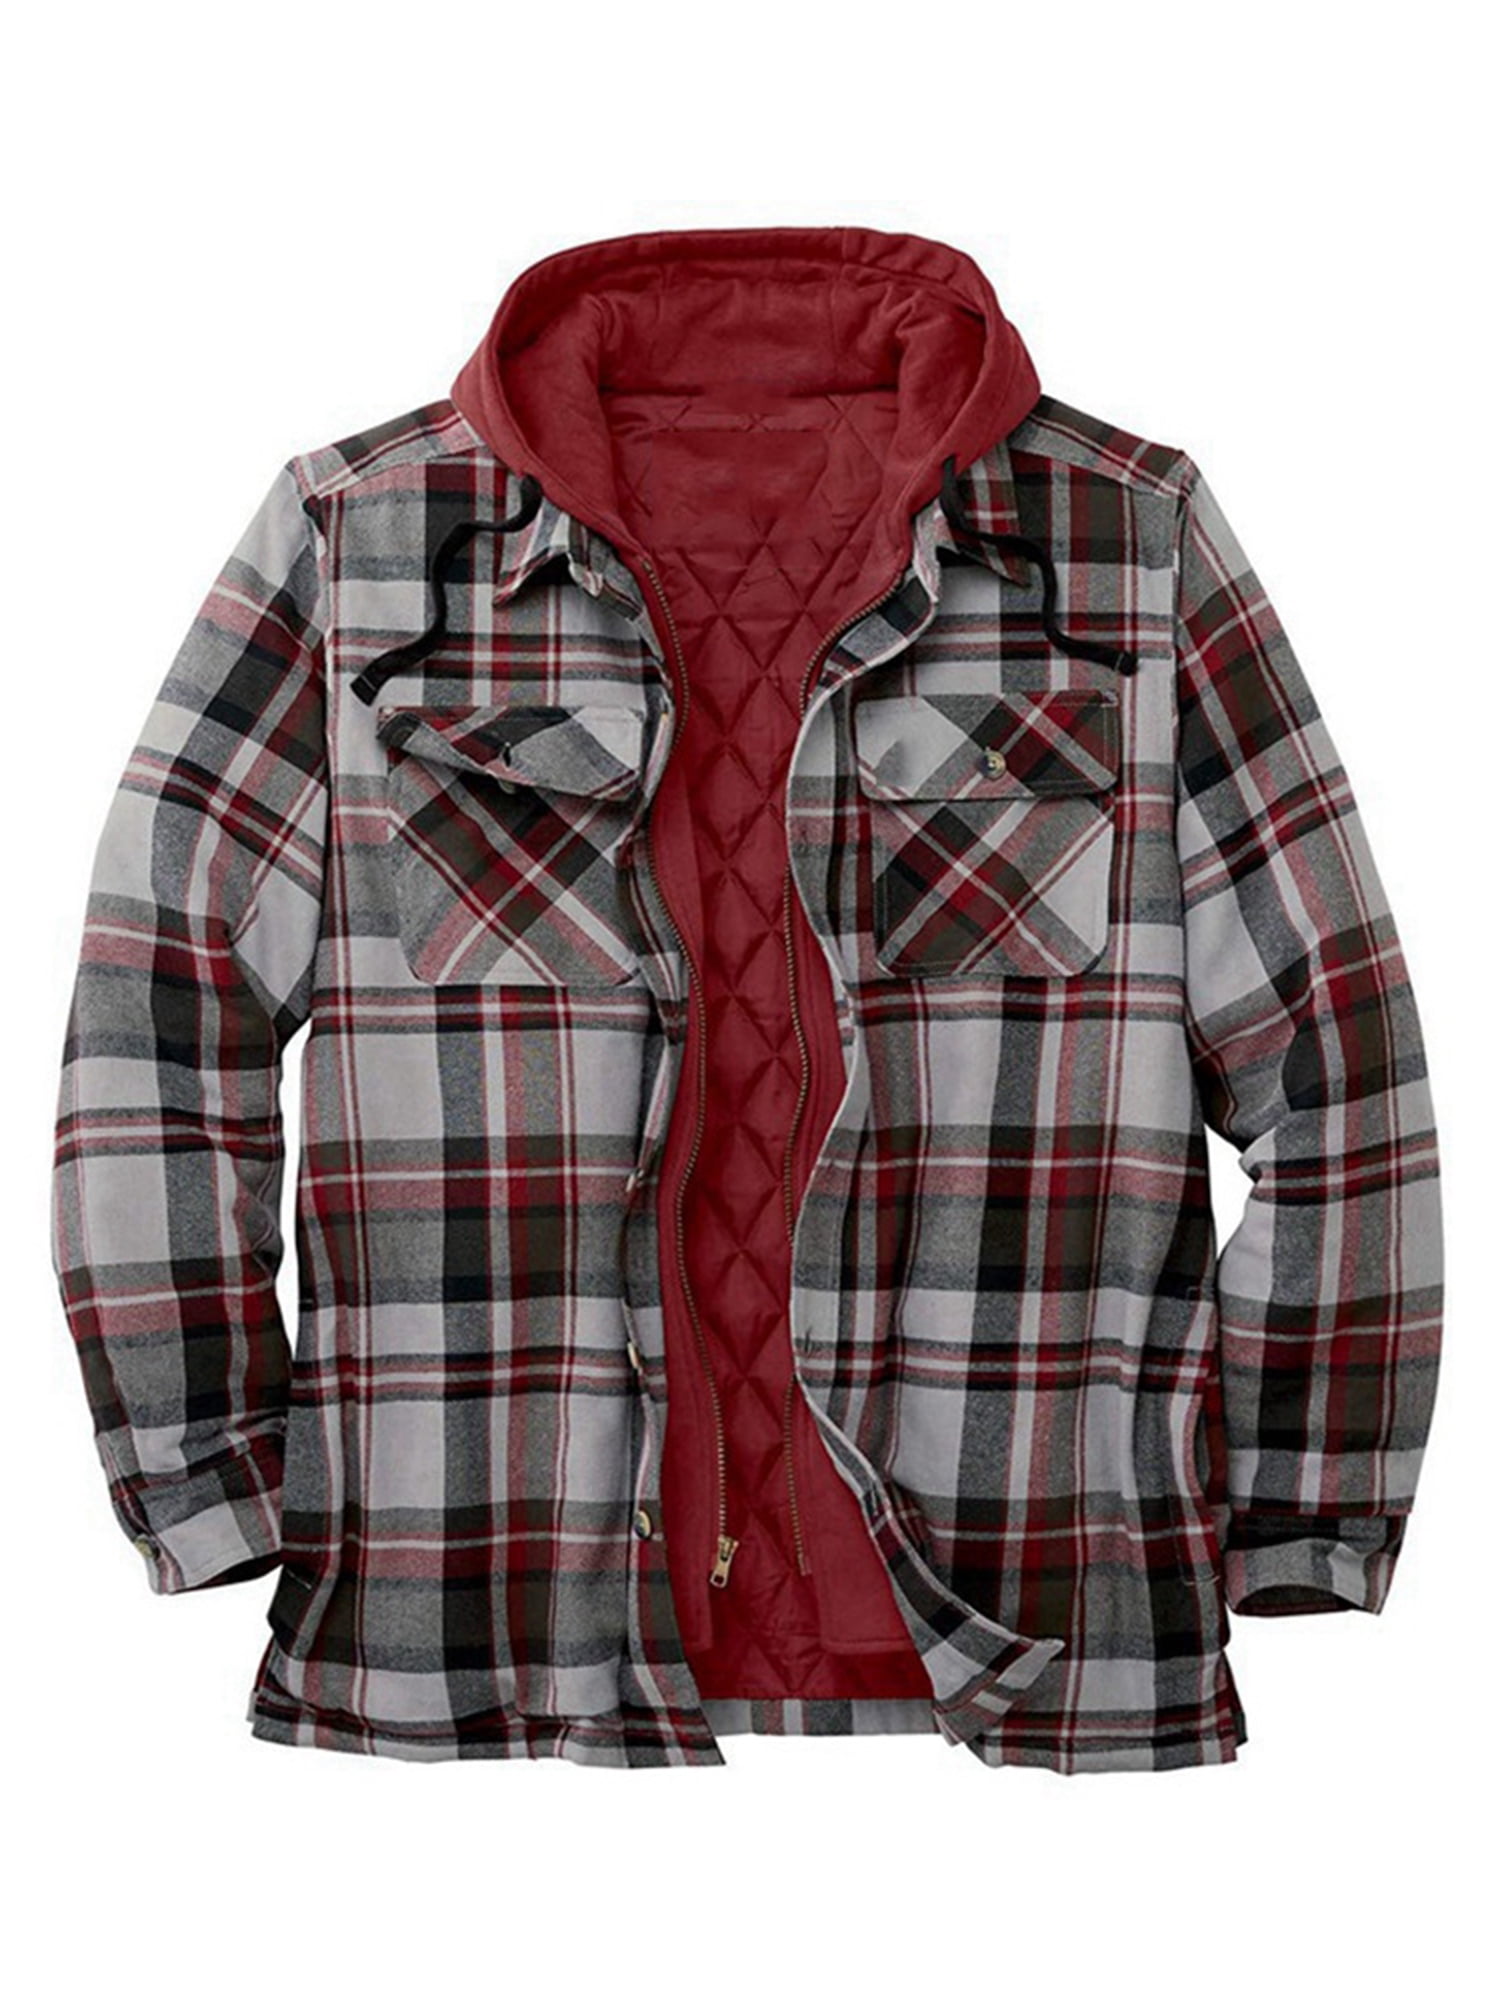 Men's Long Sleeve Quilted Lined Shirt Jacket with Hood Casual Snap Front Plaid Maplewood Flannel Coats 